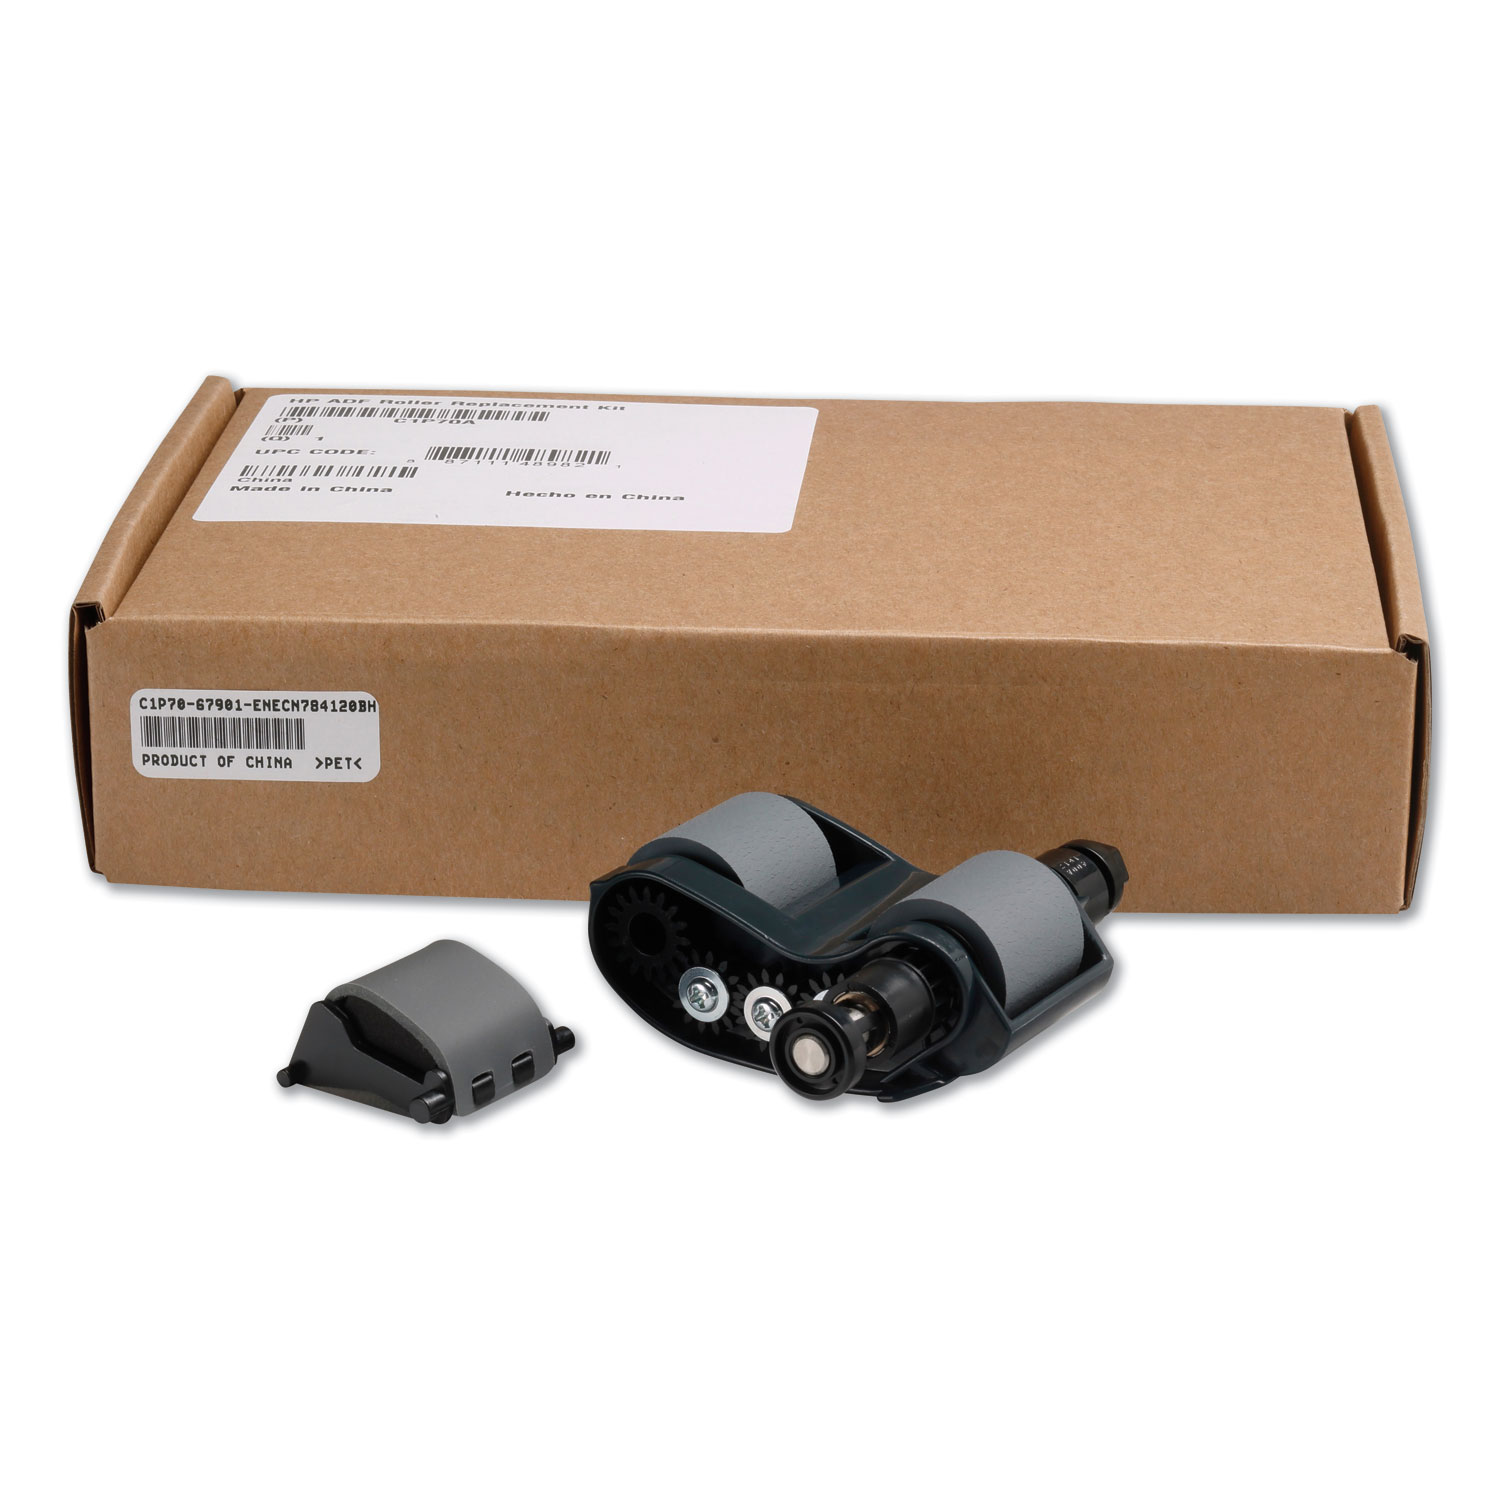  HP C1P70A C1P70A ADF Replacement Roller Kit (HEWC1P70A) 